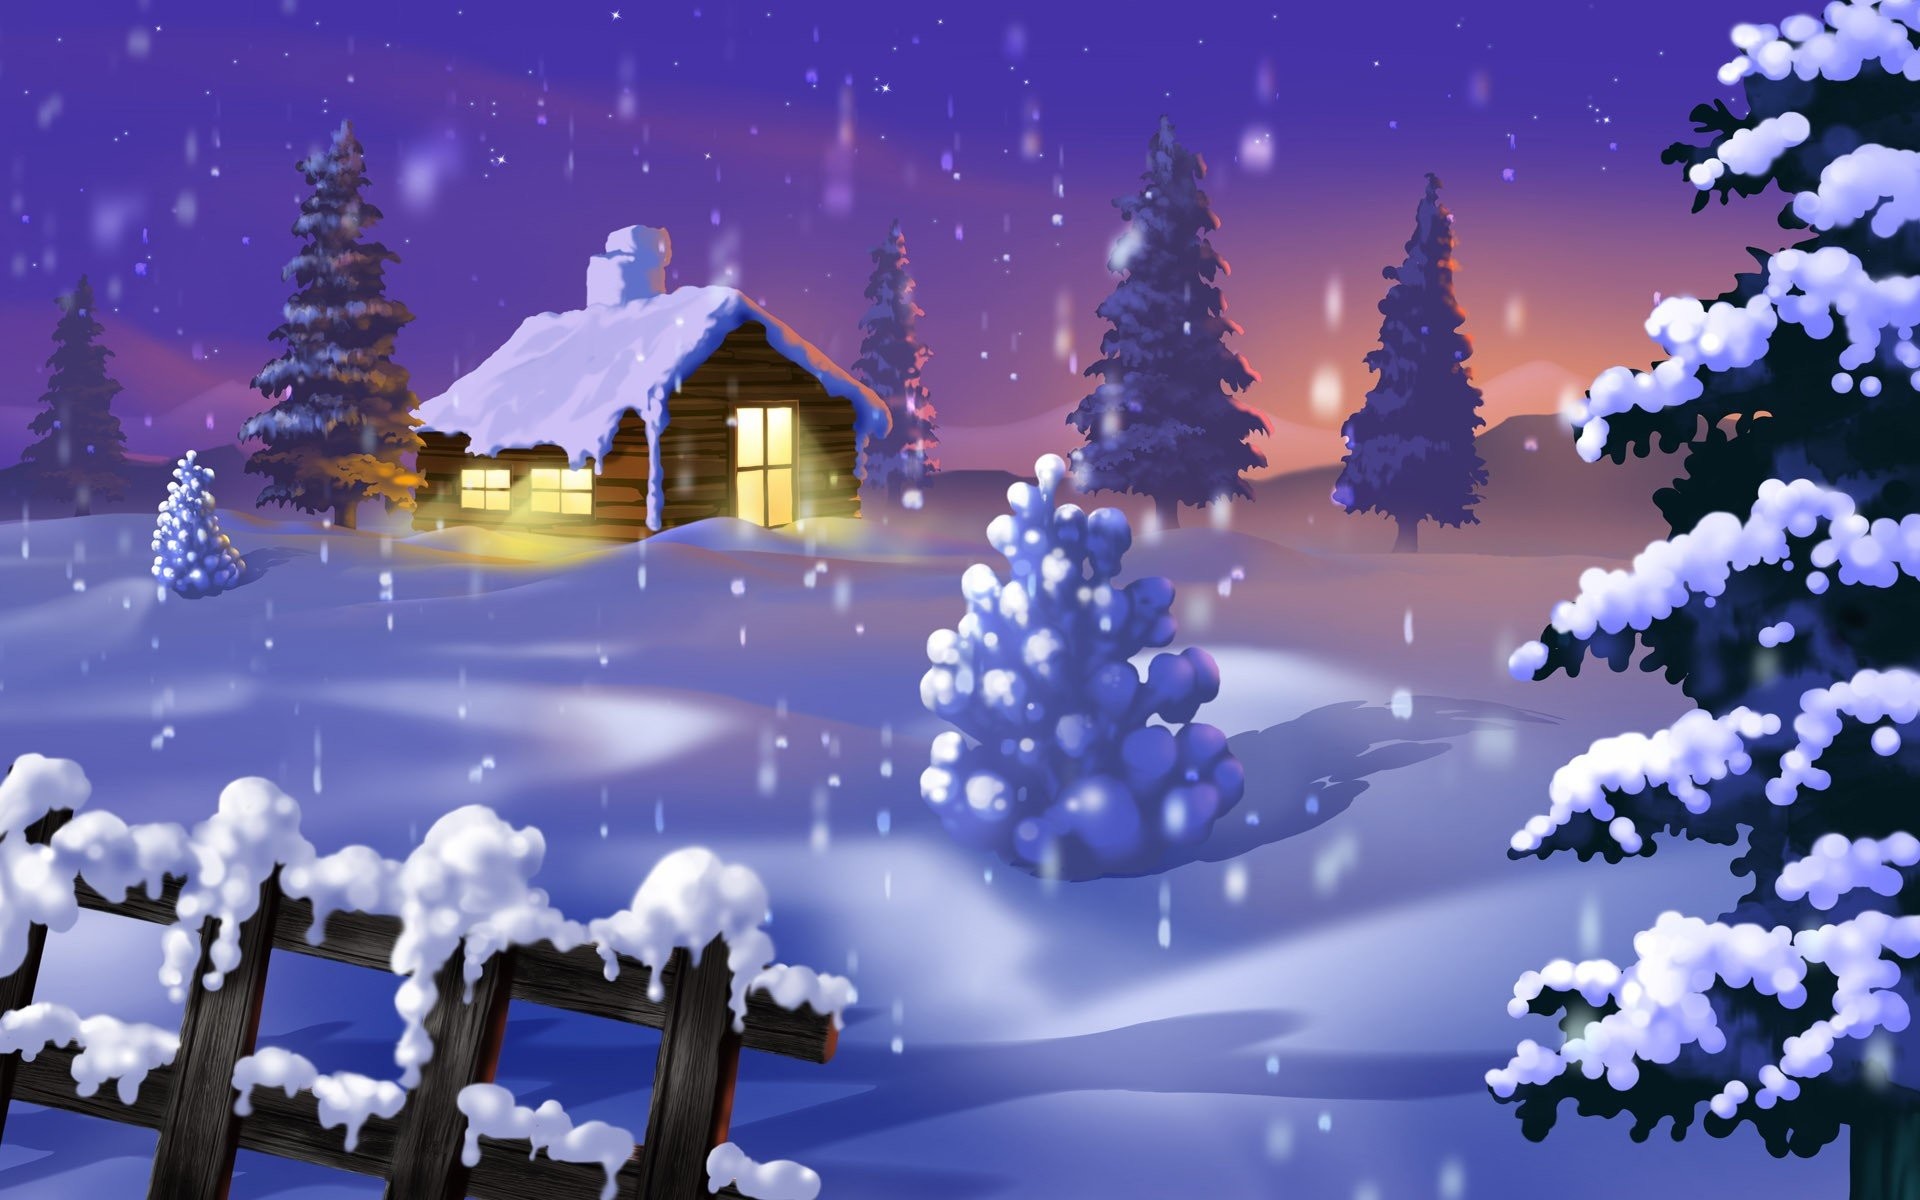 Top 7 Beautiful Winter Snow Live Wallpapers for Android